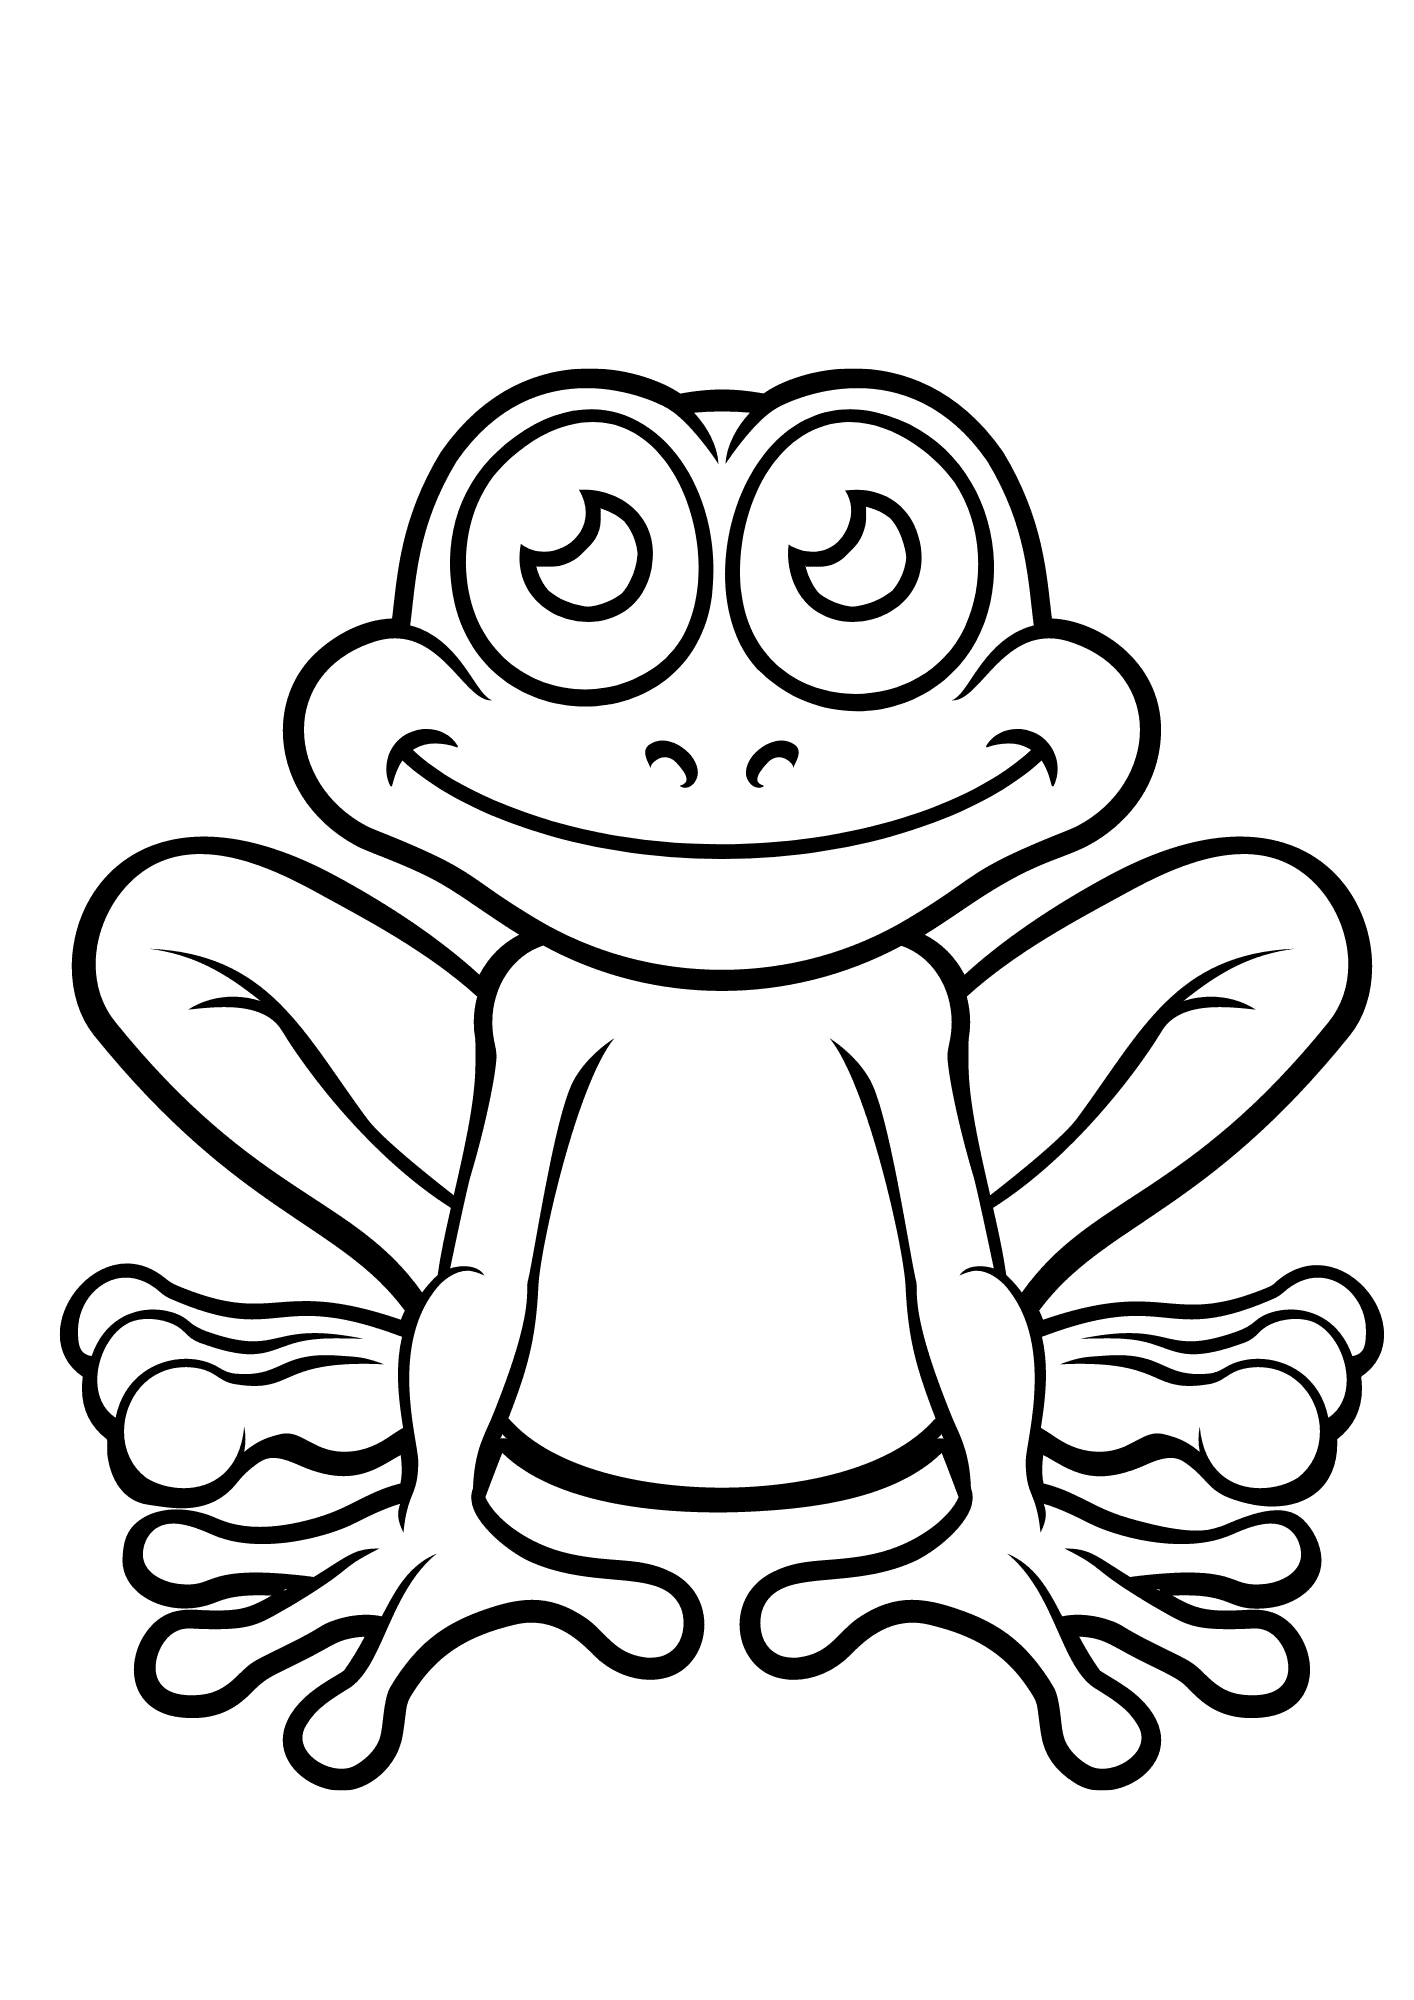 Frog Cartoon For Children Coloring Page